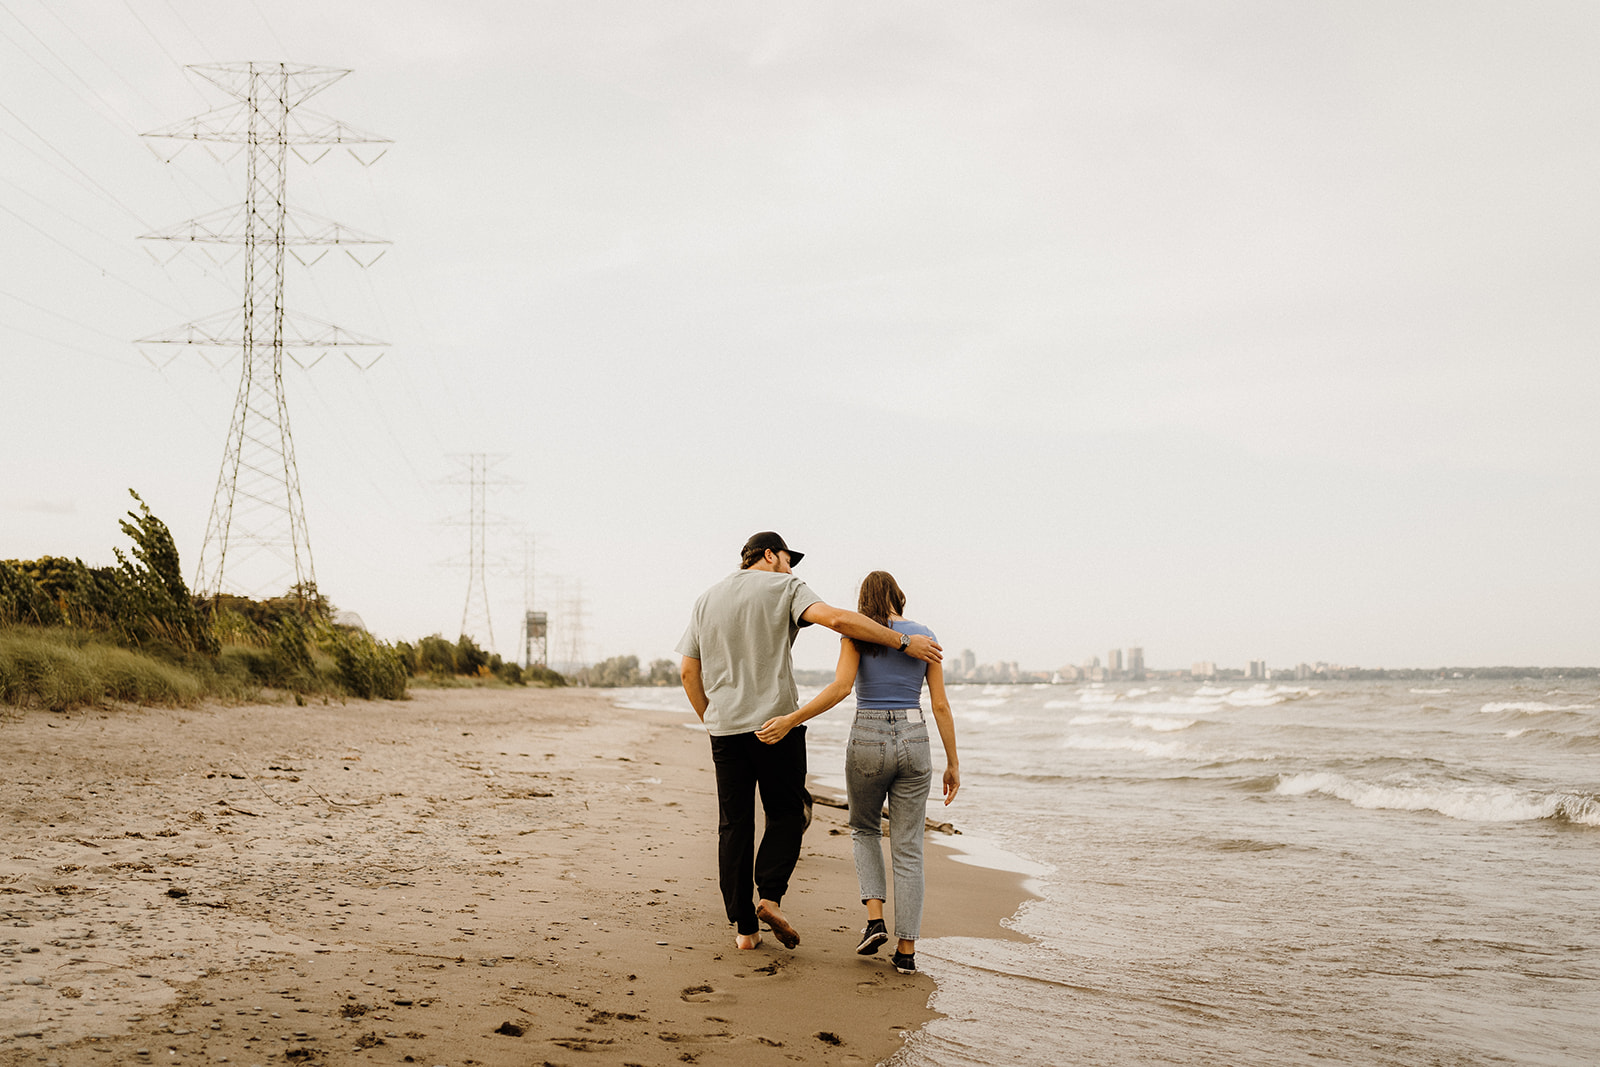 A man and woman walking down the beach together.